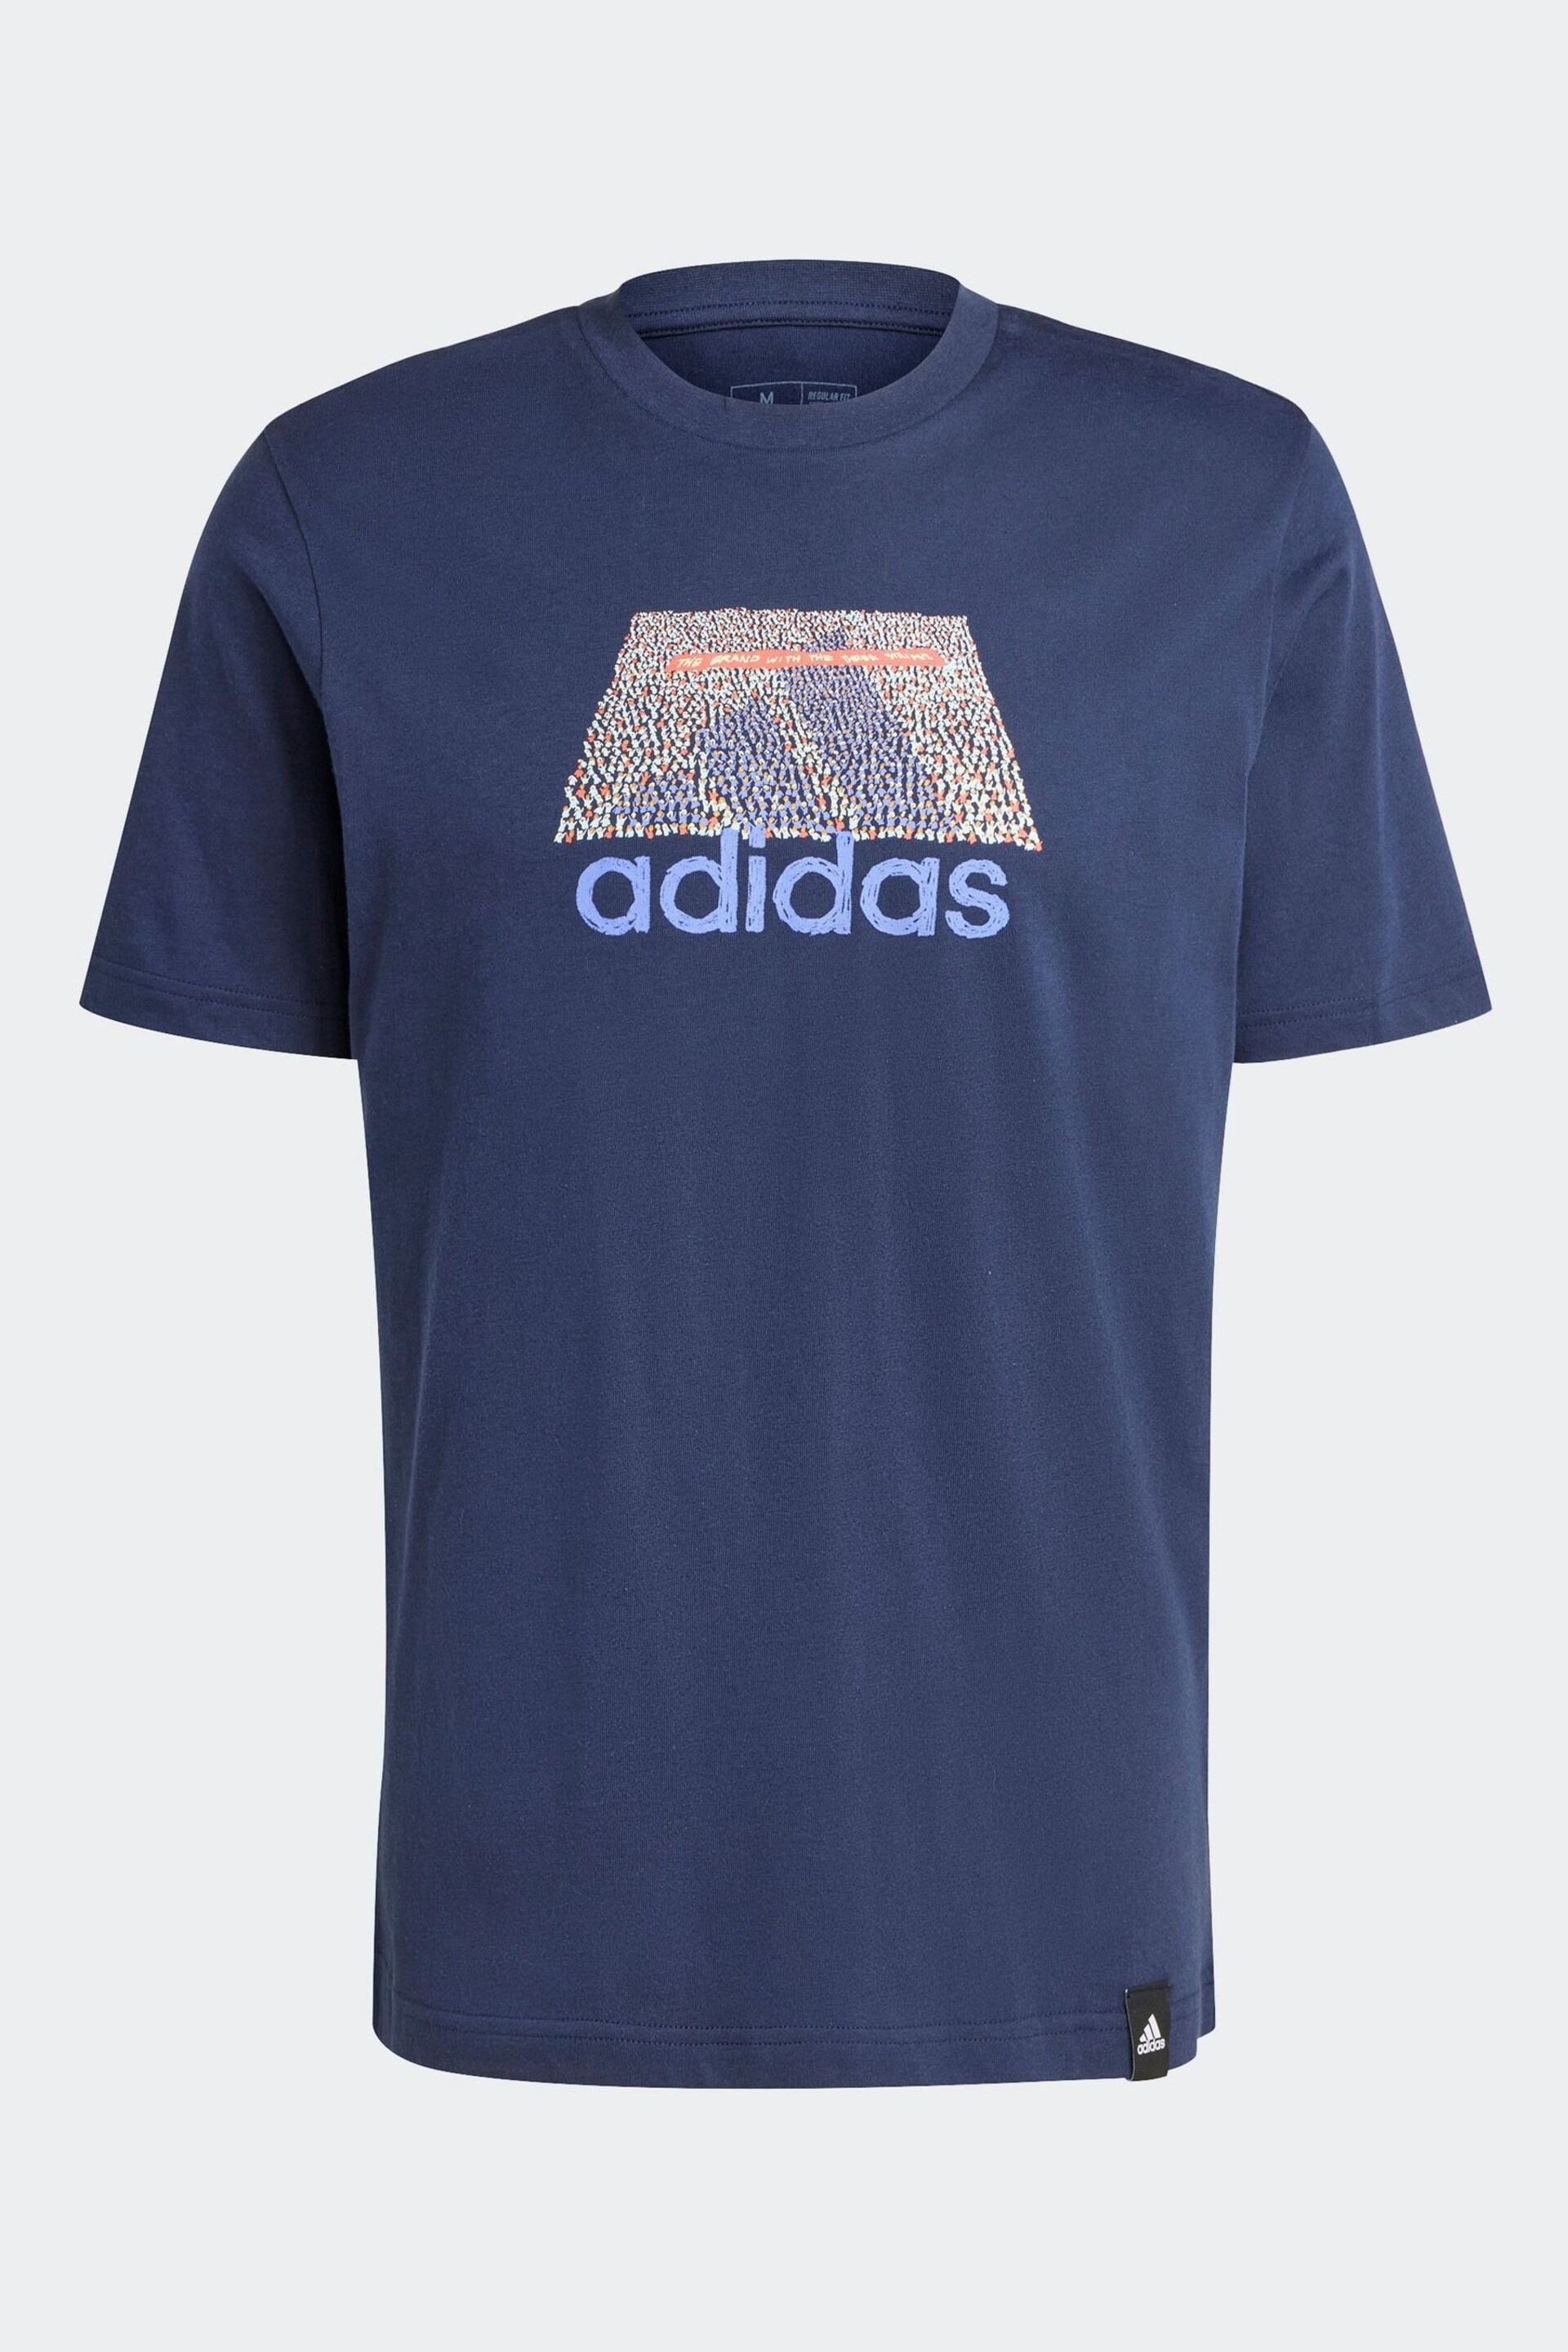 adidas Blue Codes Graphic T-Shirt - Image 7 of 7